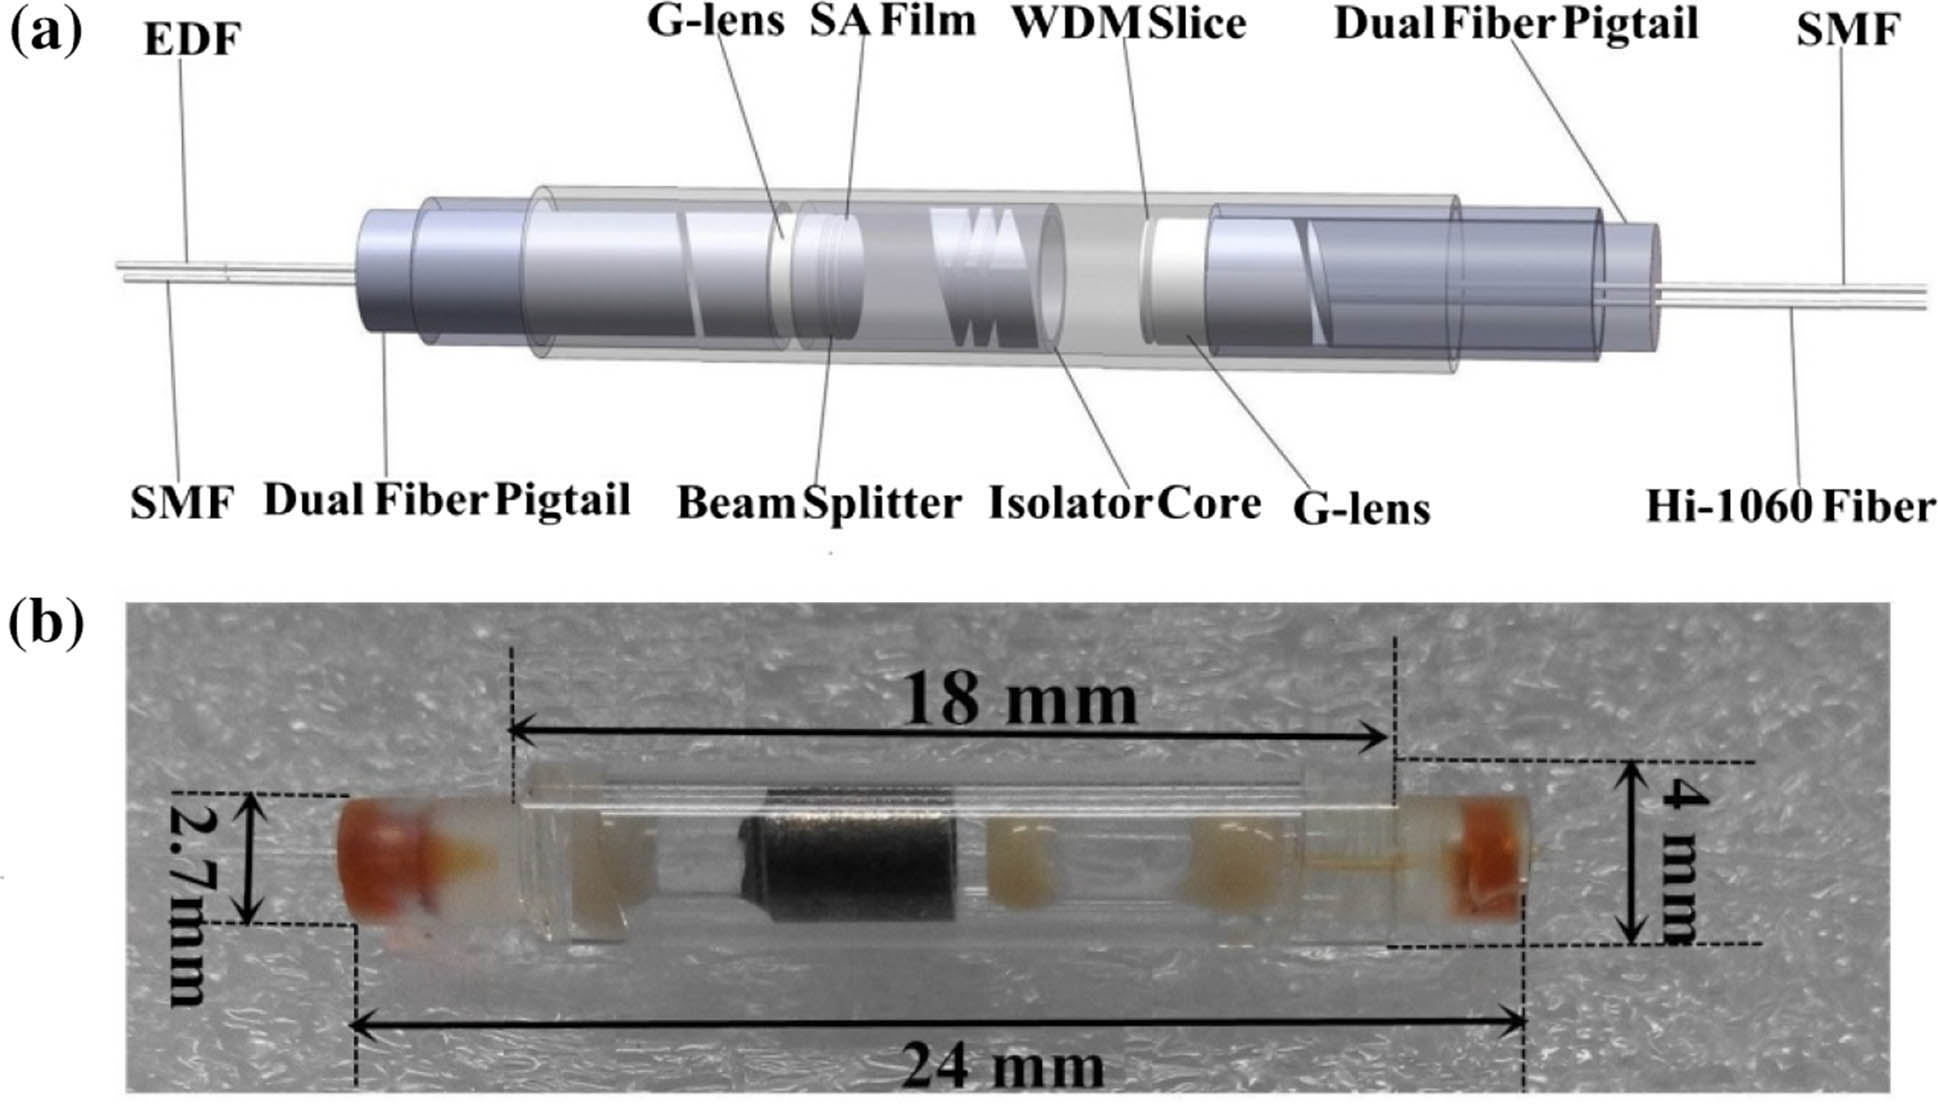 (a) Internal schematic setup of the highly integrated optical device. EDF, erbium-doped fiber; SMF, single-mode fiber; G-lens, gradient-index lens; SA film, saturable absorber film; WDM slice, wavelength division multiplexer slice. (b) Image and size of the proposed optical device.